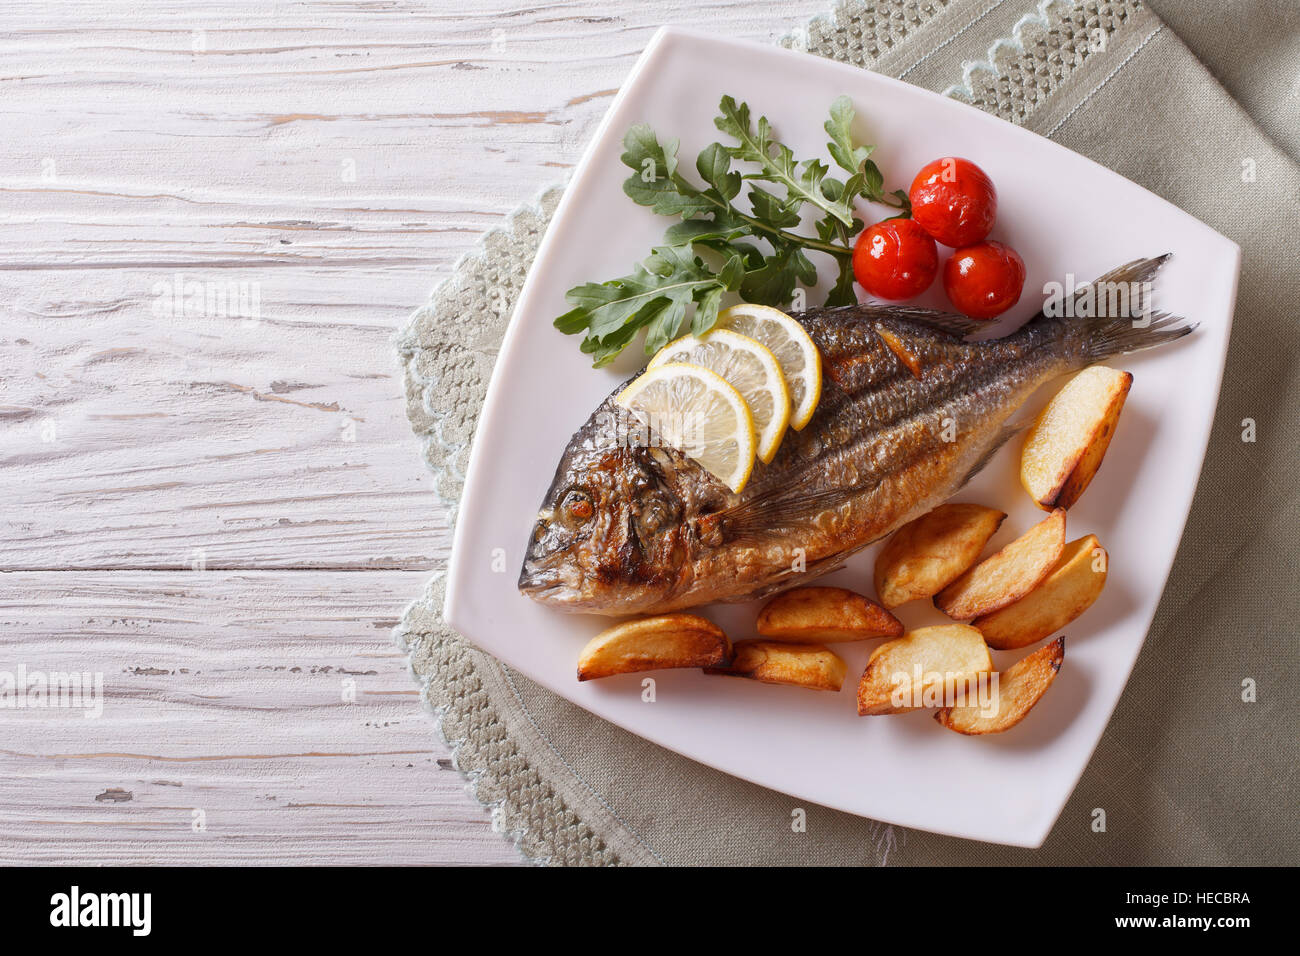 Grilled dorado fish with fried potatoes, lemon and tomato close-up on a plate. horizontal top view Stock Photo